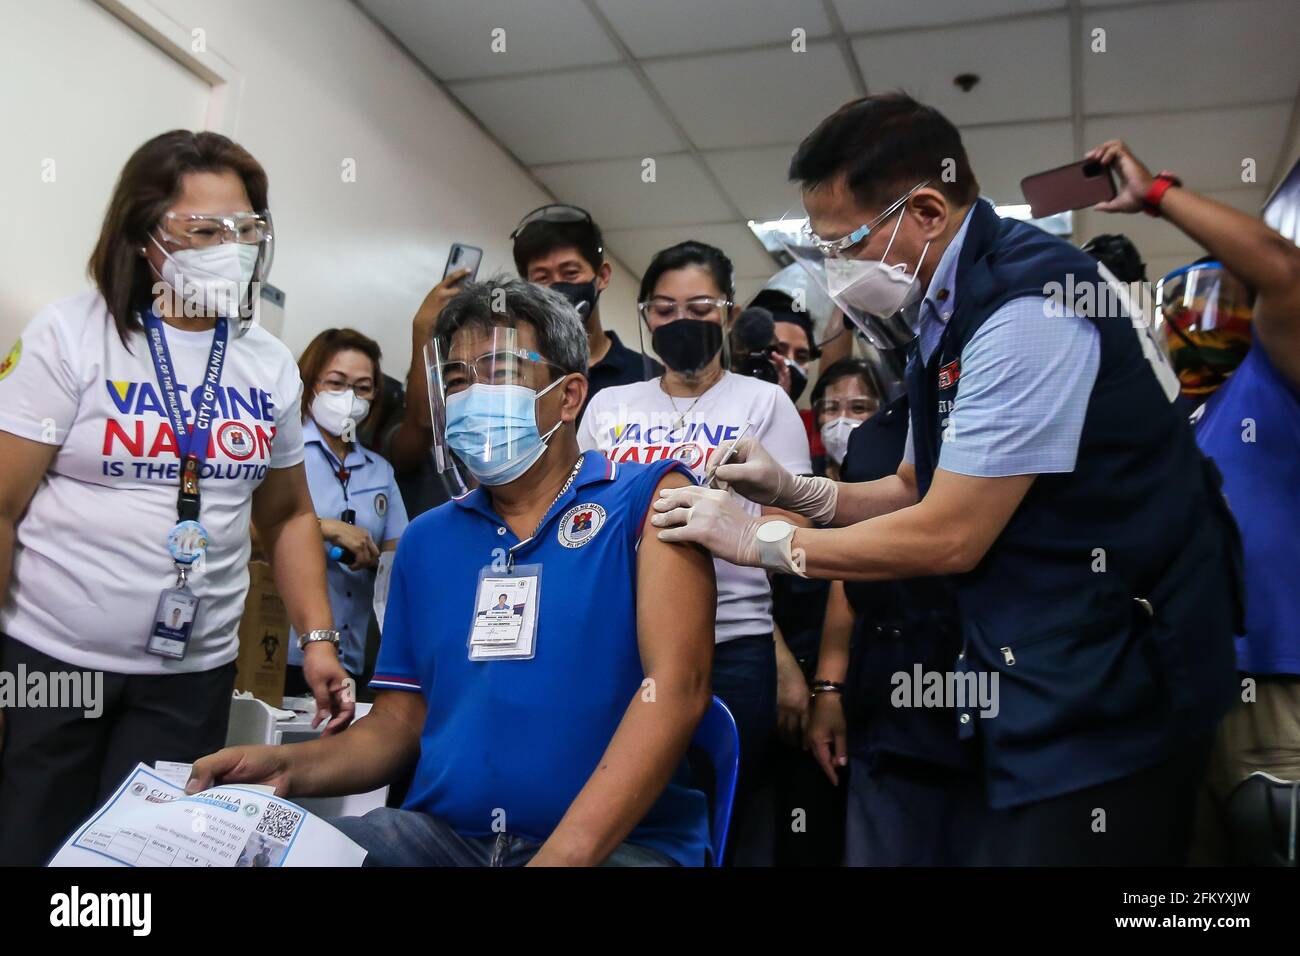 Manila, Philippines. 4th May, 2021. Philippine Health Secretary Francisco Duque administers a dose of the Russia-made COVID-19 vaccine 'Sputnik V' in the arm of a health worker in Manila, the Philippines, on May 4, 2021. Credit: Rouelle Umali/Xinhua/Alamy Live News Stock Photo